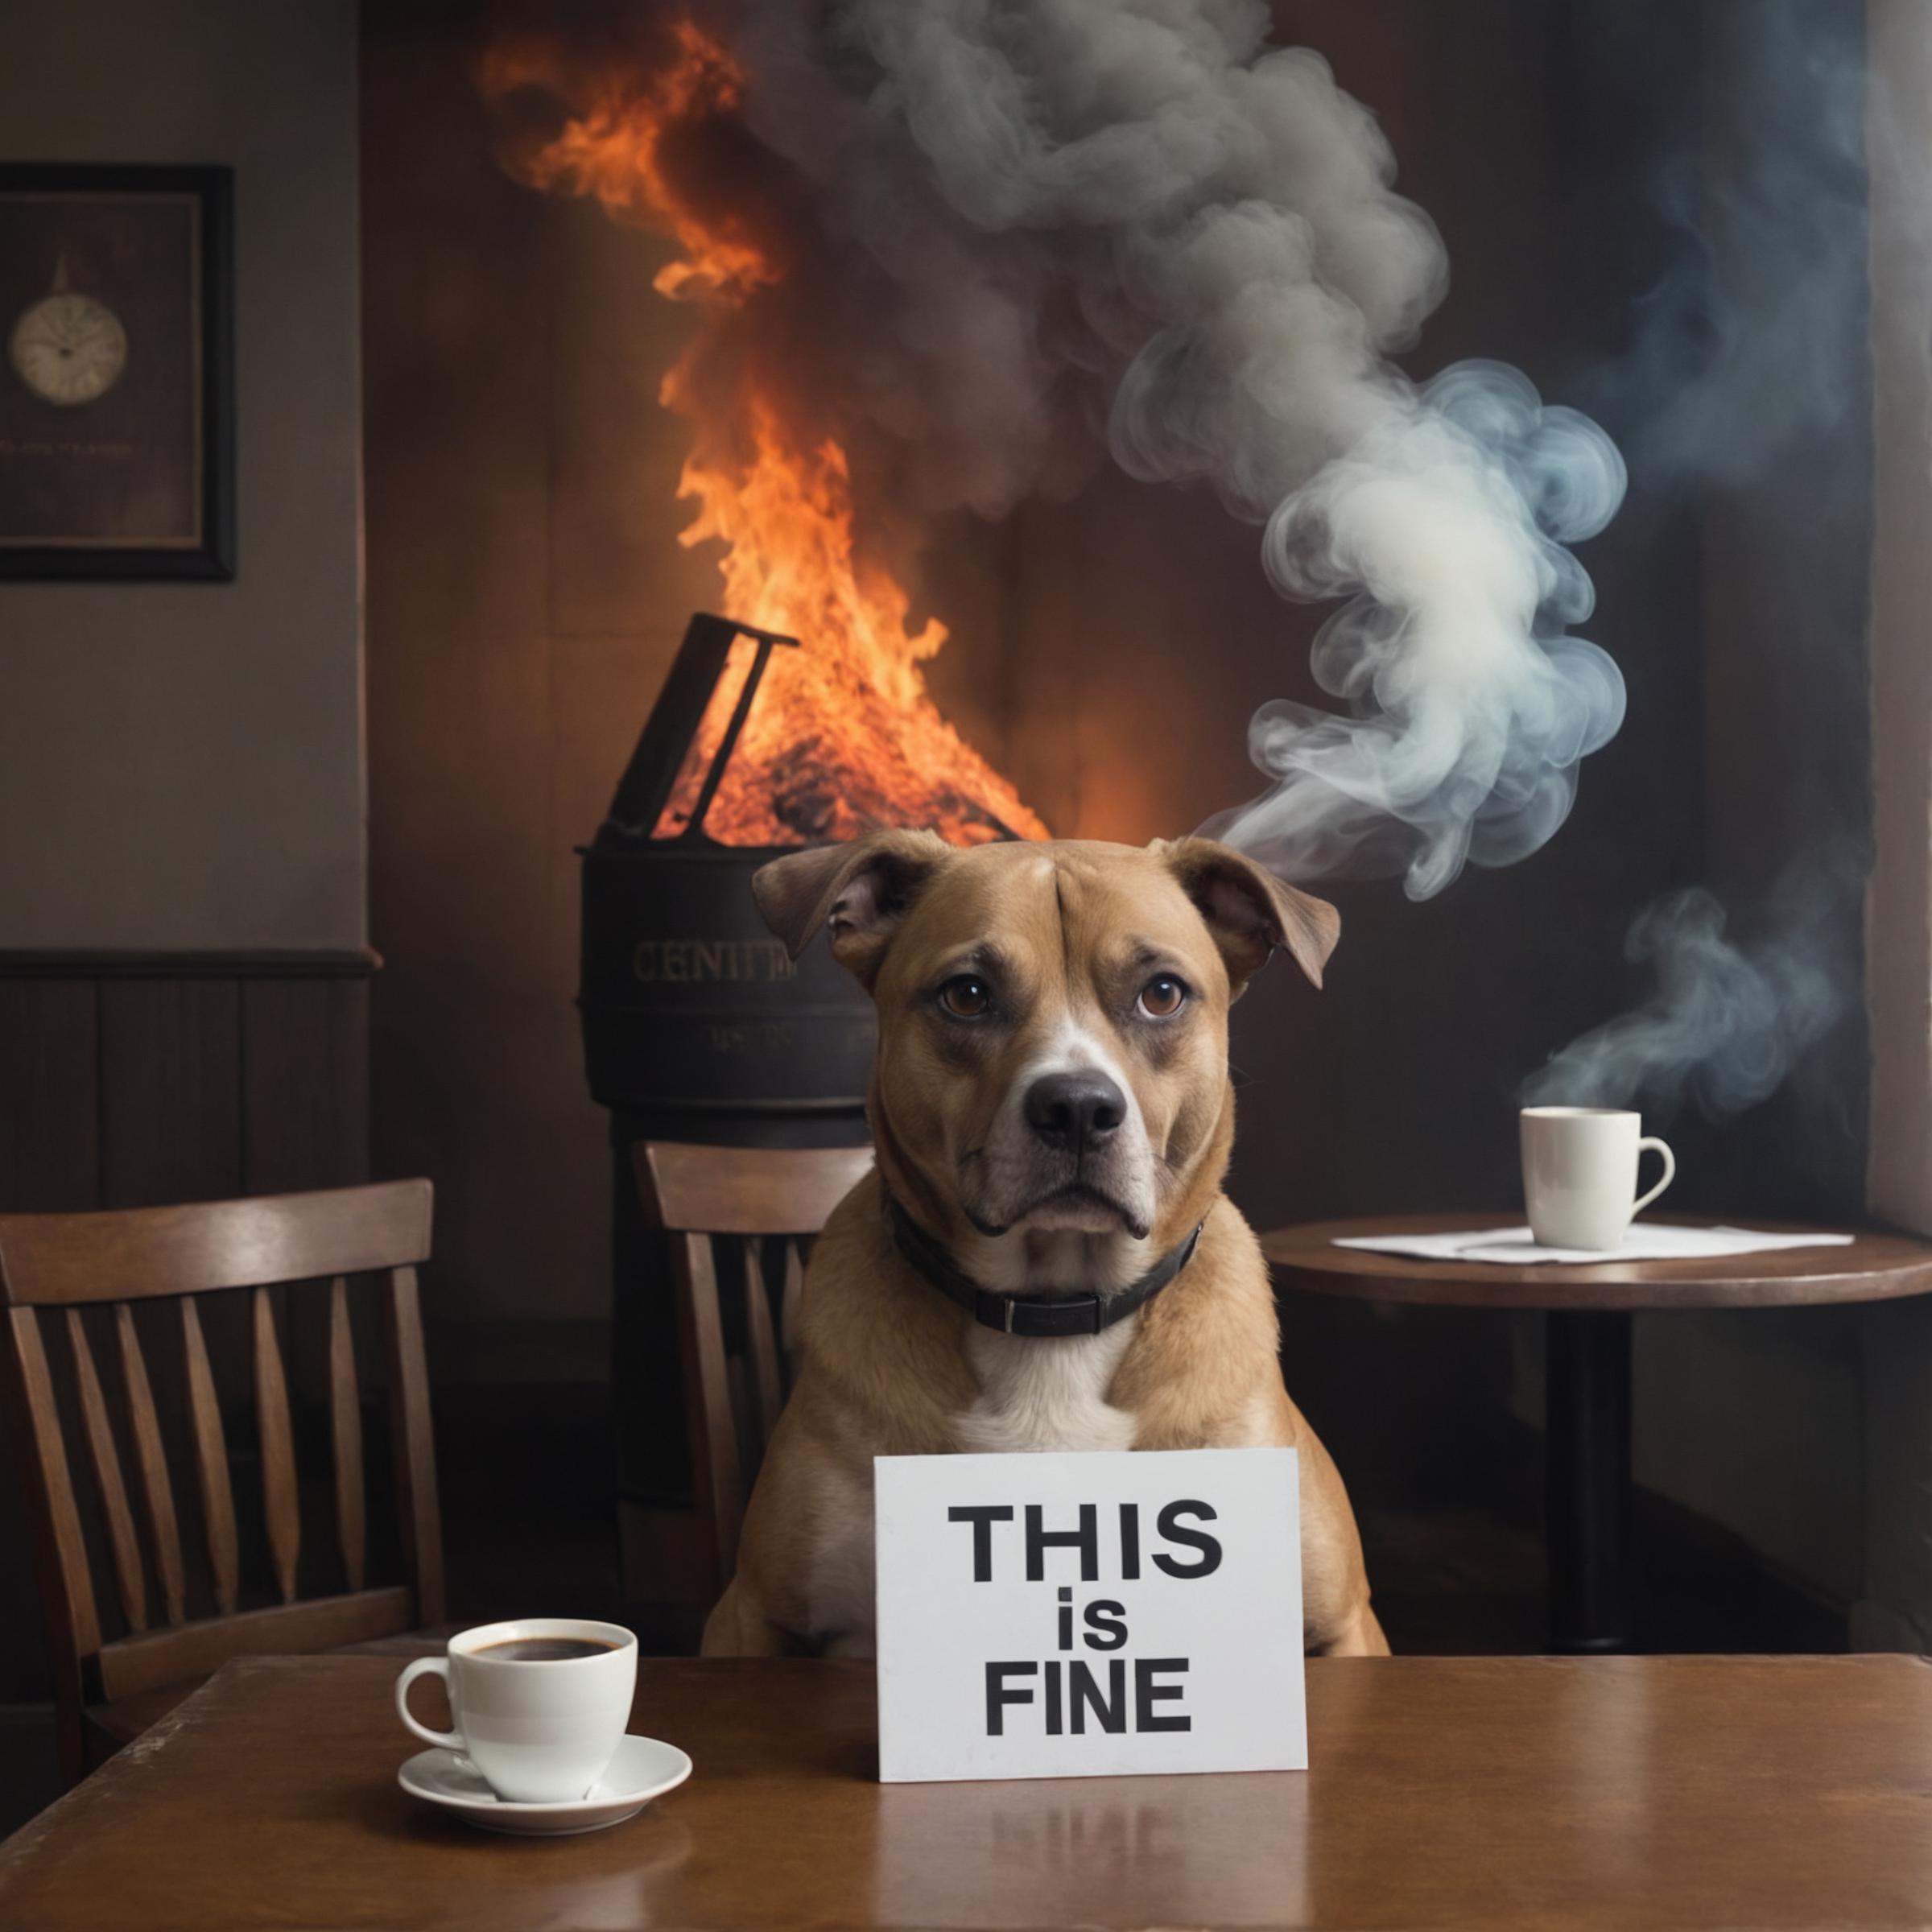 A dog sitting at a table with a sign that says "This is fine" in front of a fire in the background.